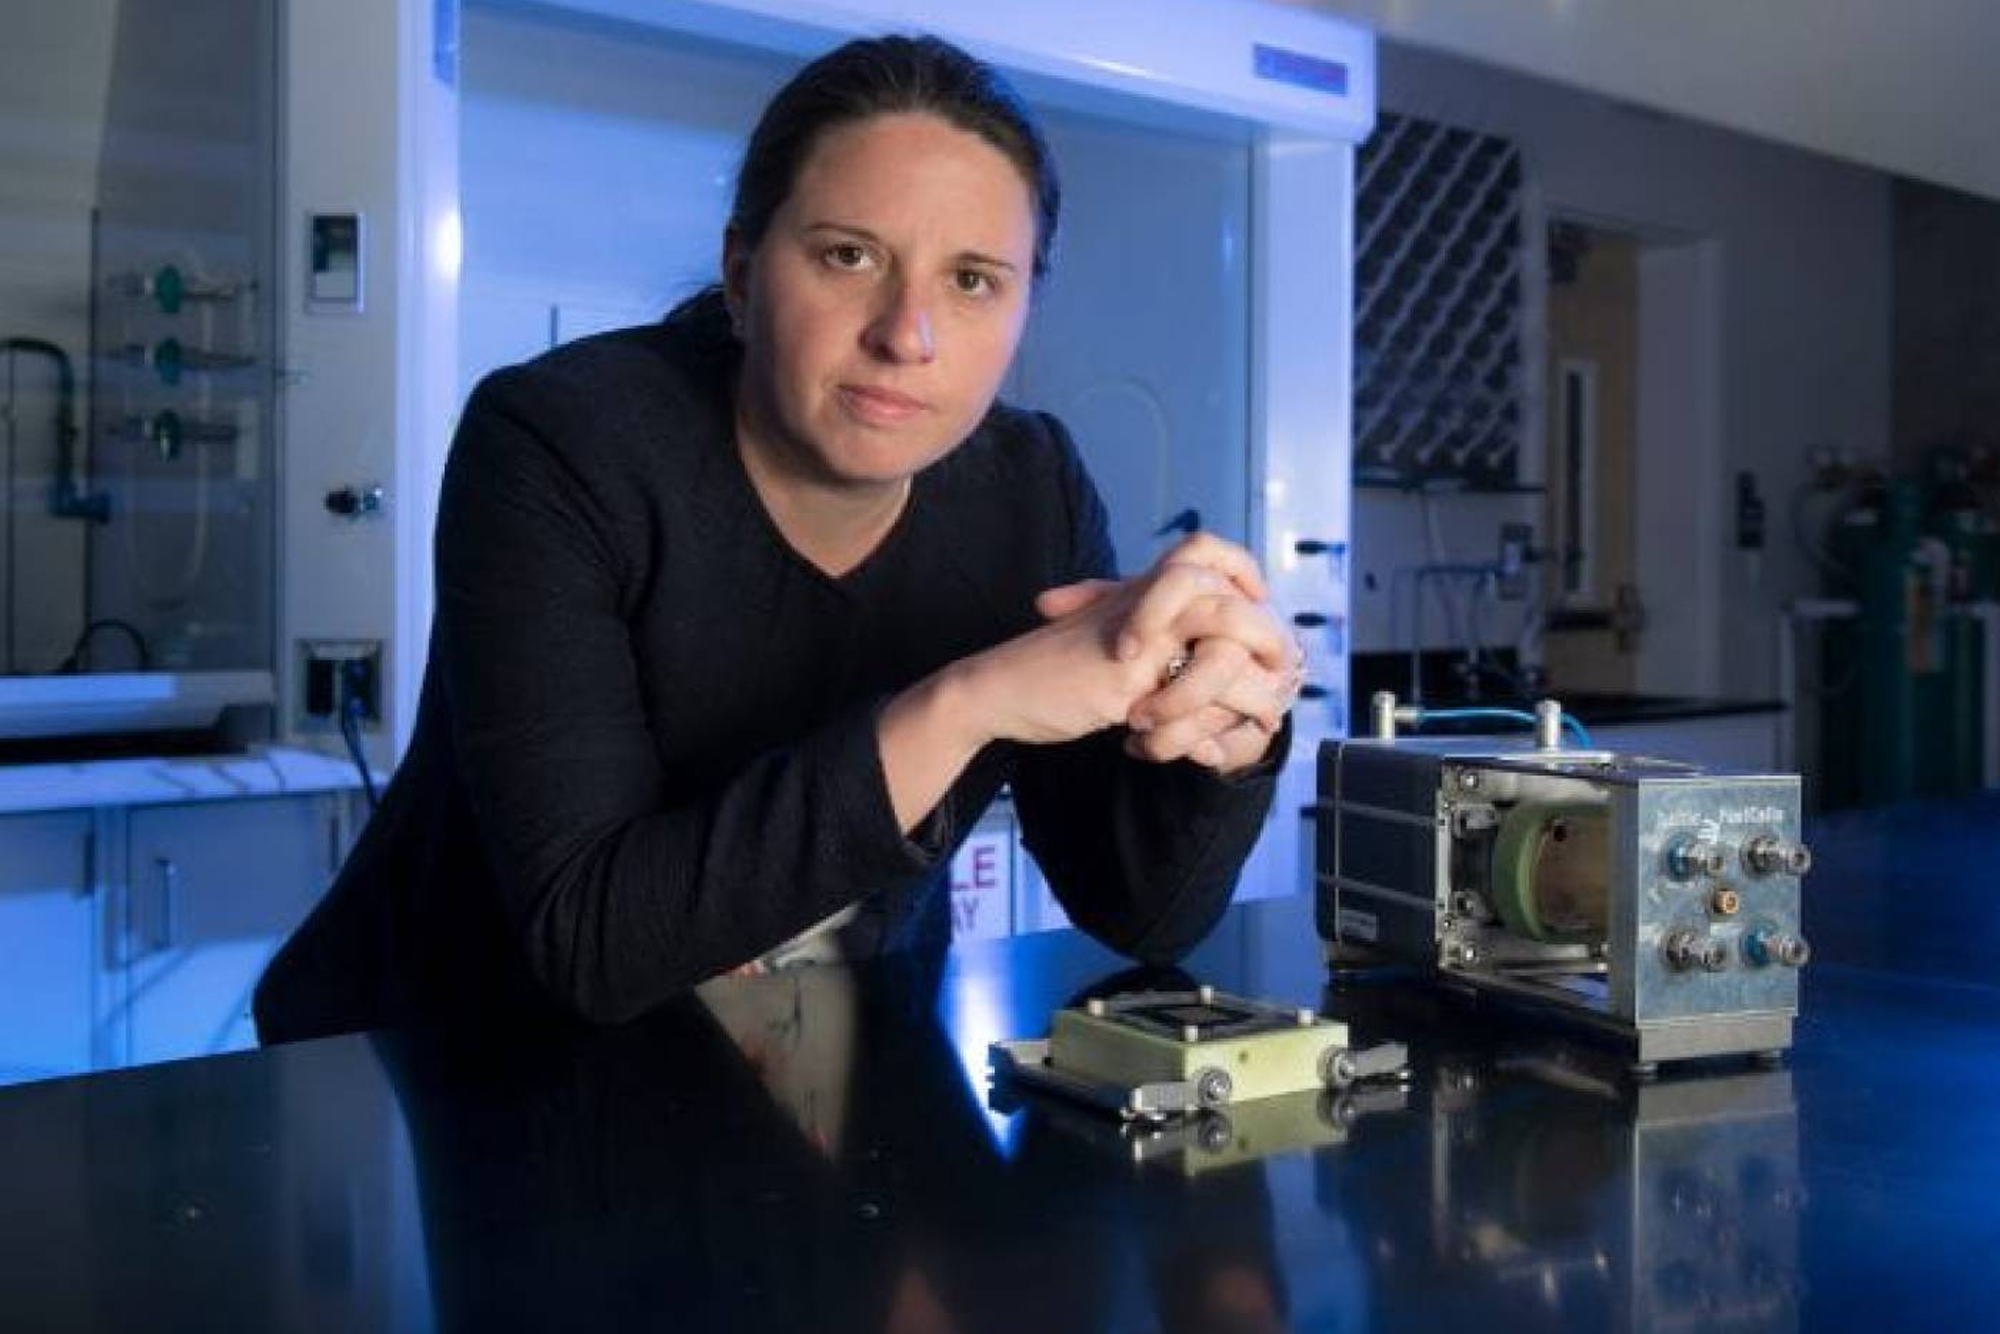 Iryna Zenyuk, Associate Professor of Chemical and Biochemical Engineering, University of California, Irvine, and Associate Director of National Fuel Cell Research Center